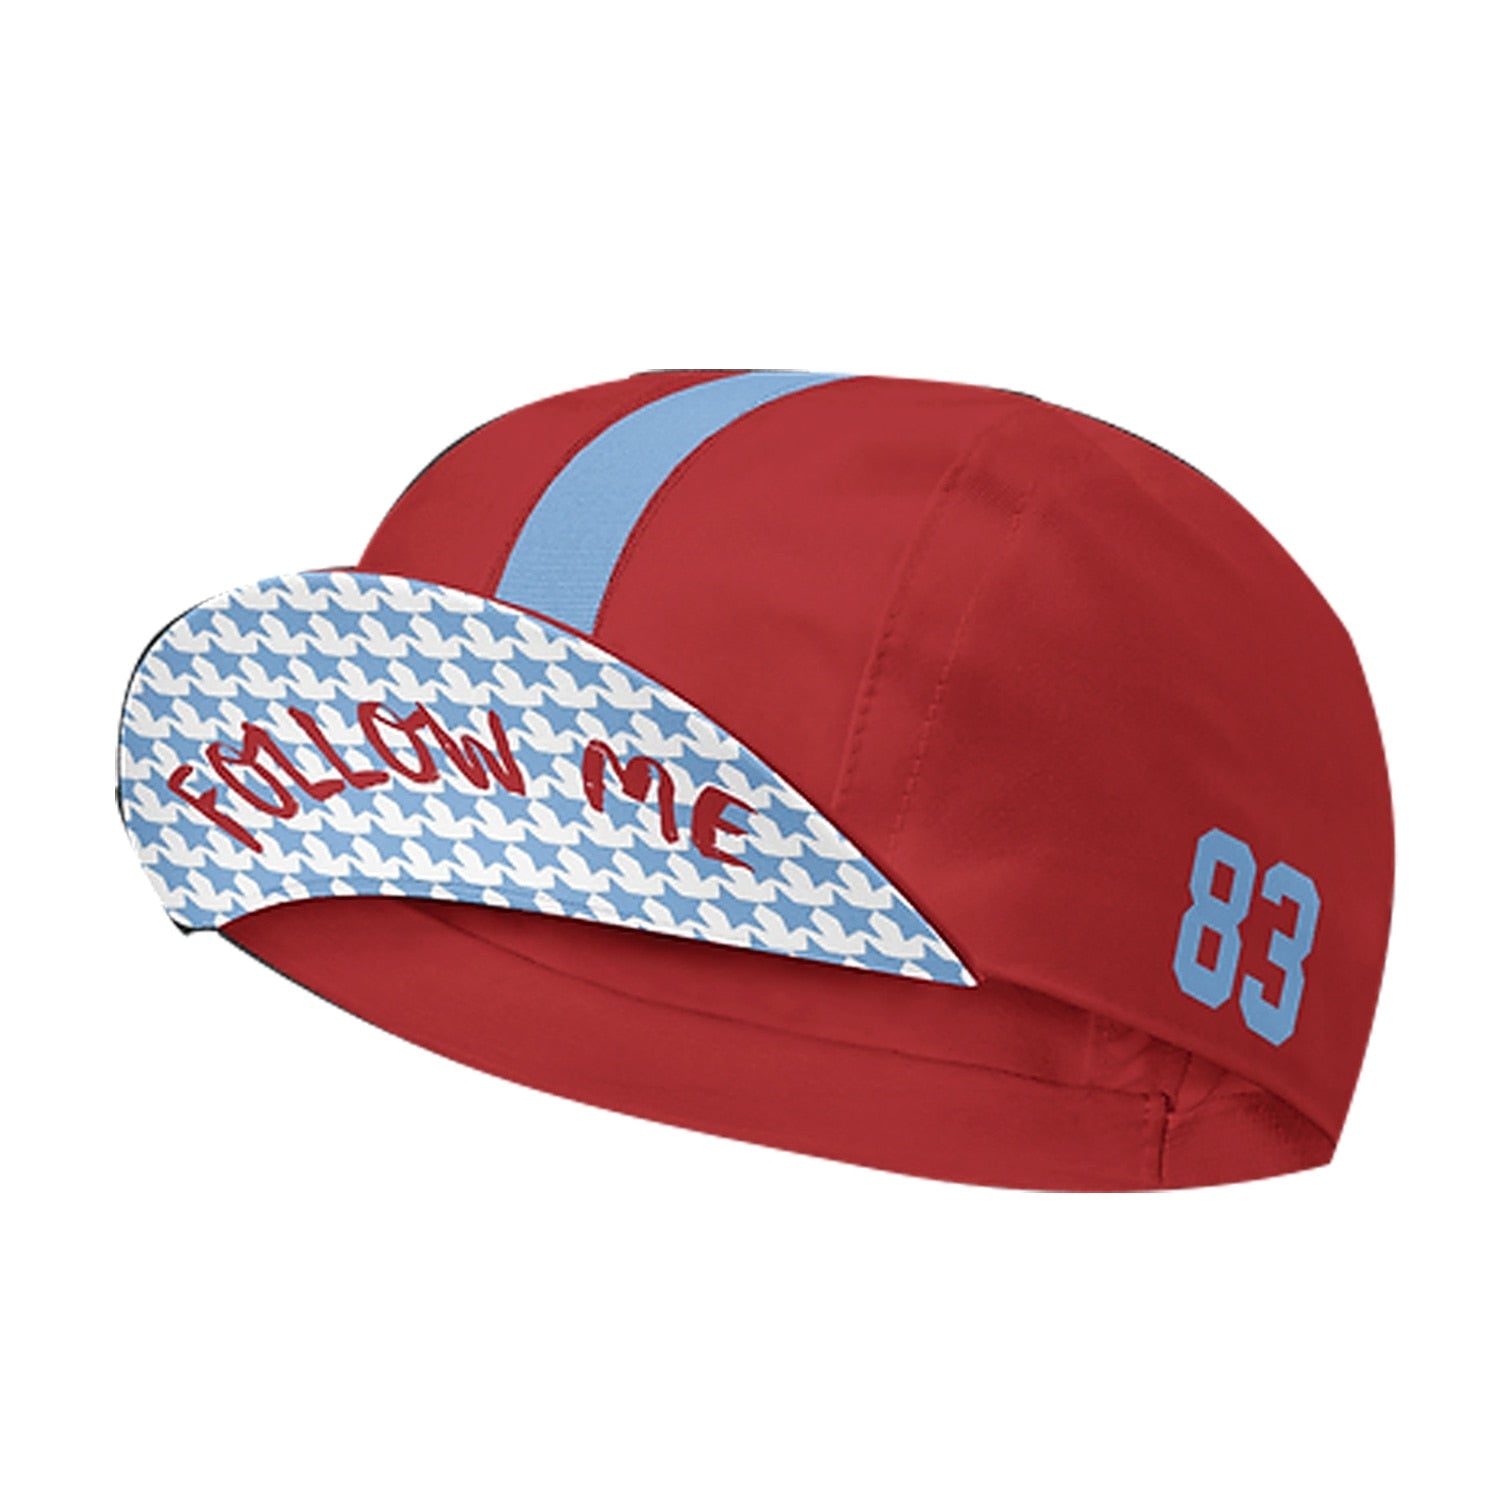 Individuality Follow Me No. 83 Red Polyester Cycling Caps Top Quick Dry Bike Hat Absorb Sweat Breathable Unisex